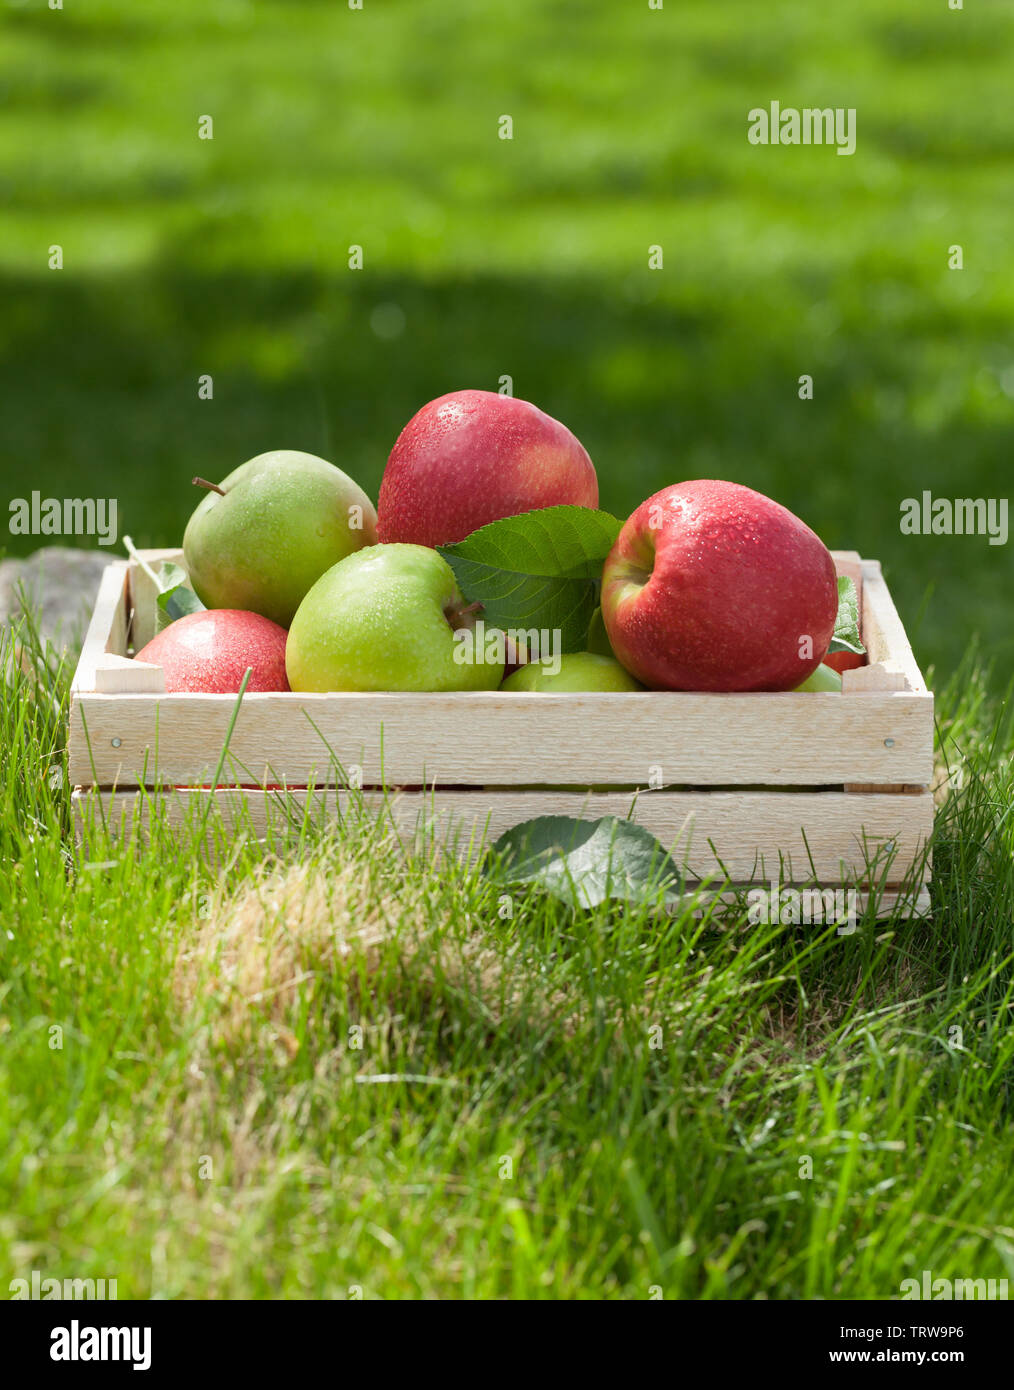 Fresh garden green and red apples in box. On outdoor grass meadow with copy space for your text Stock Photo